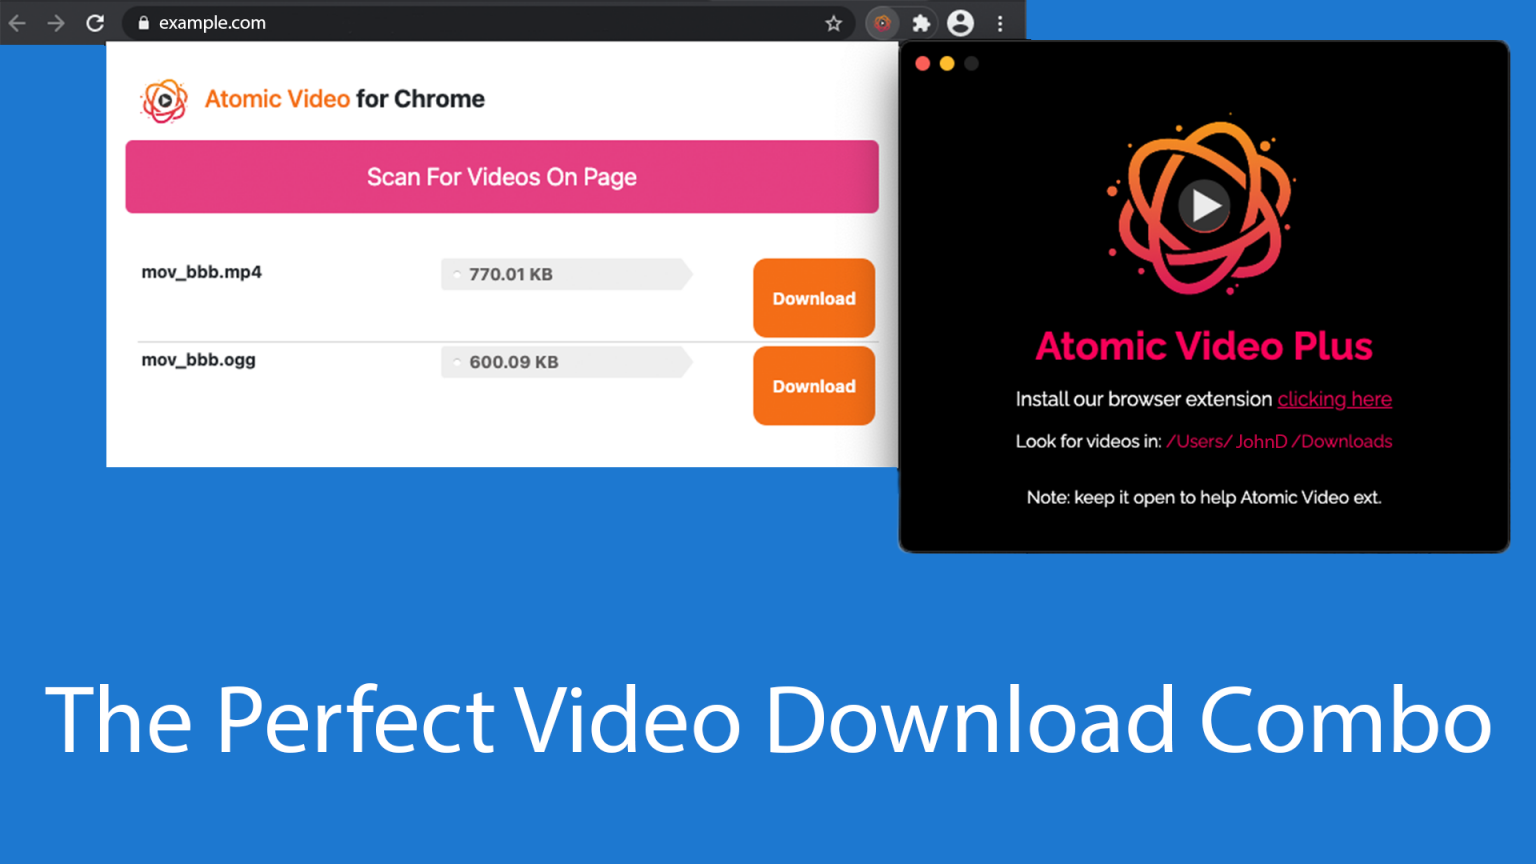 Atomic Heart for mac instal free